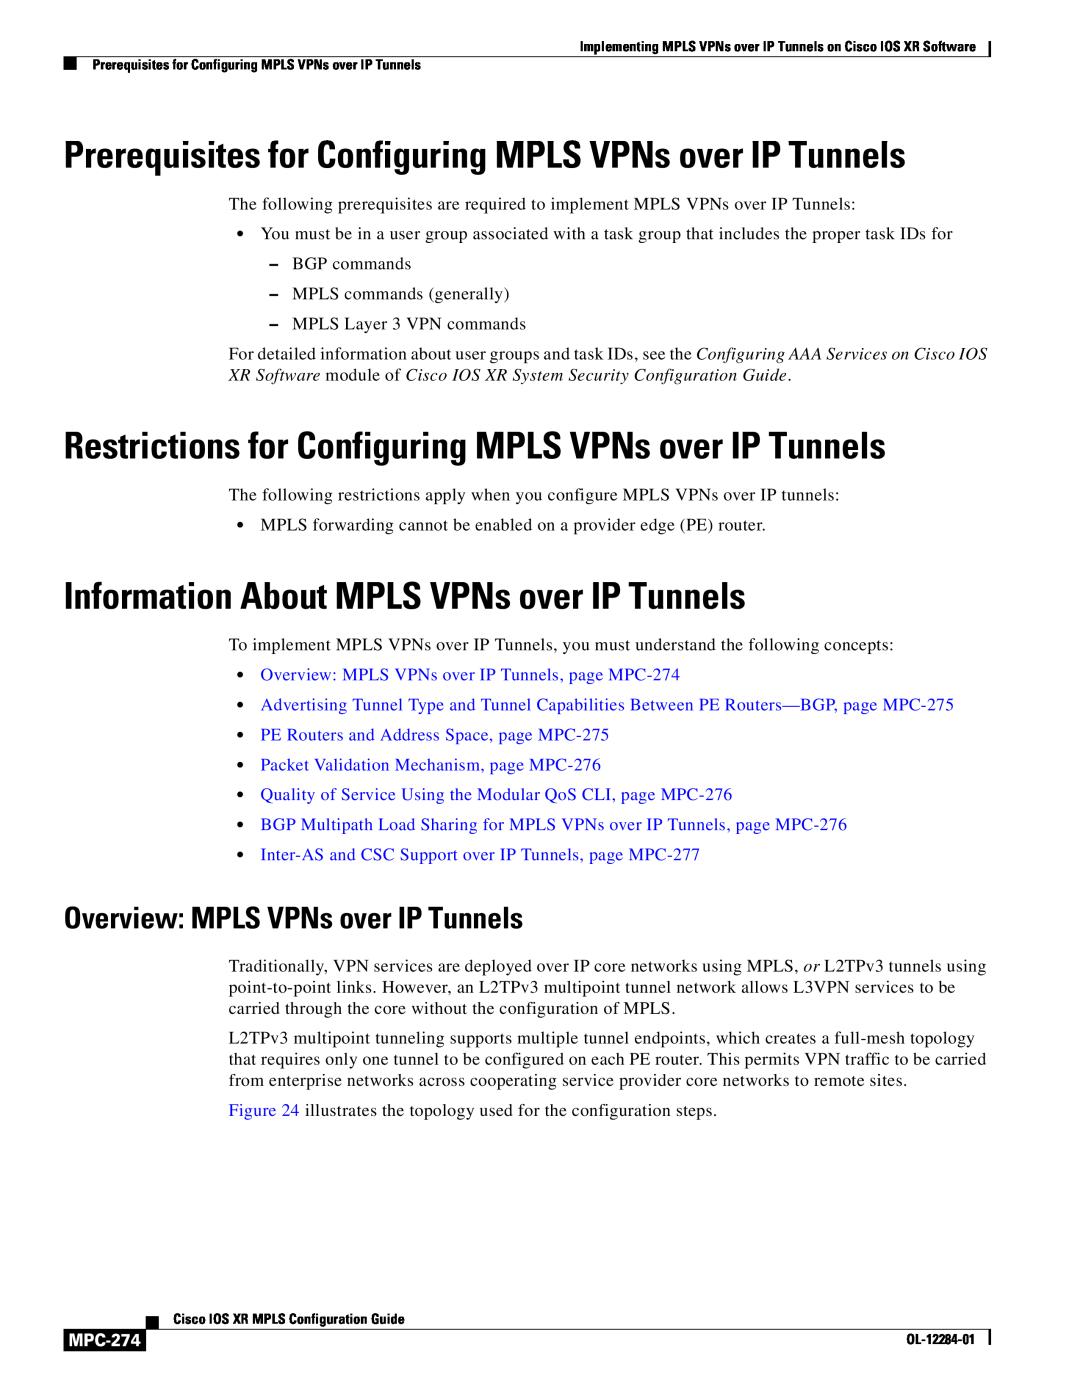 Cisco Systems MPC-273 Restrictions for Configuring MPLS VPNs over IP Tunnels, Information About MPLS VPNs over IP Tunnels 